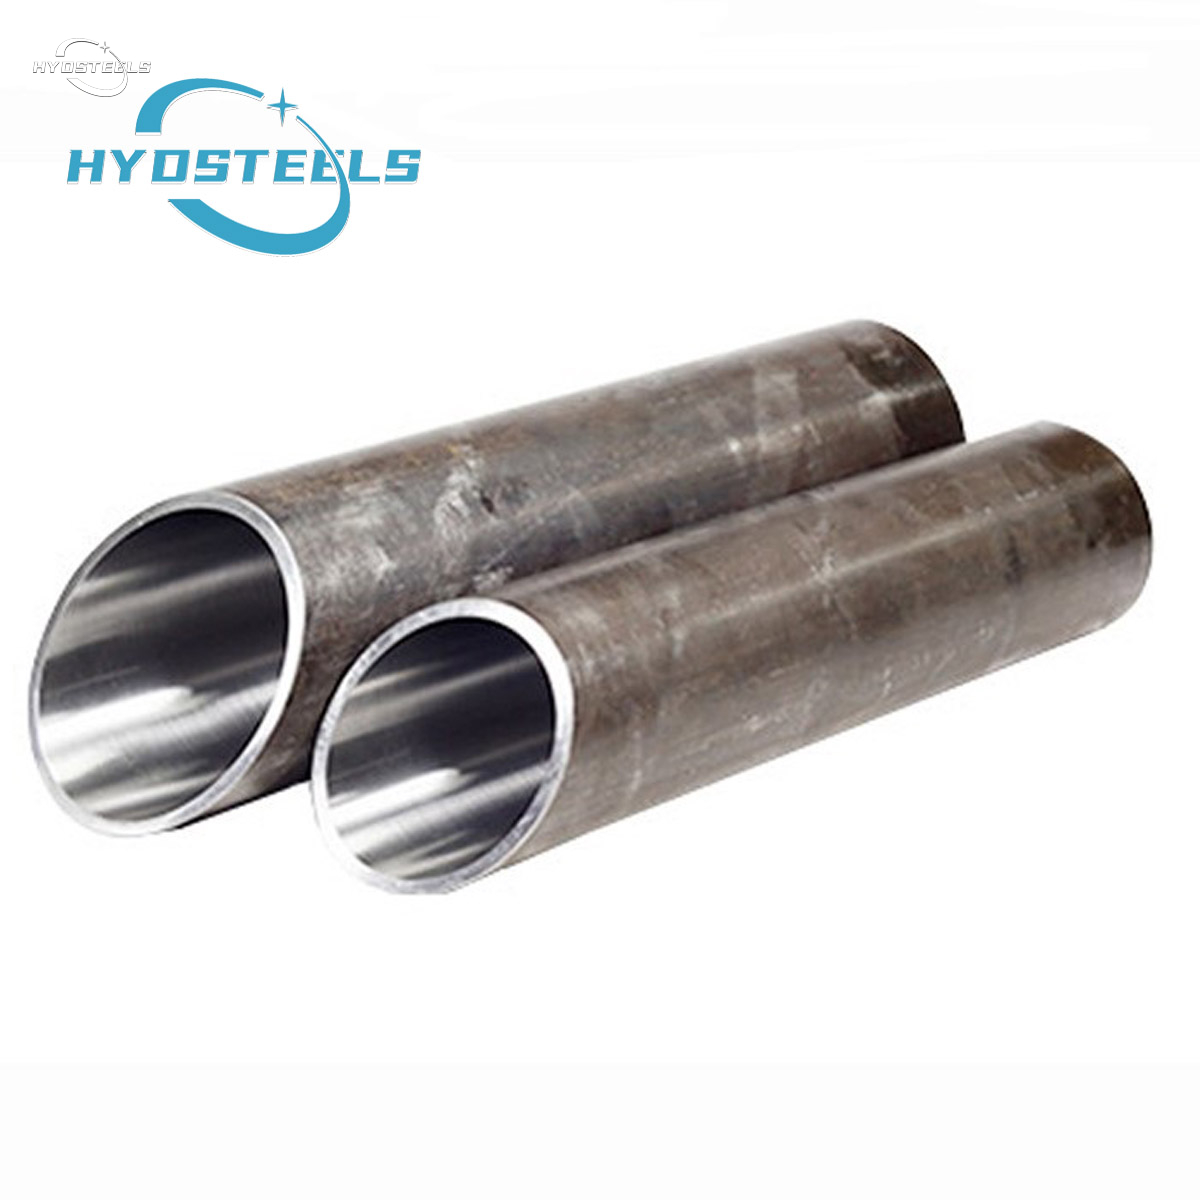 Precision Cold Drawn Bk+S H8 Honed Steel Tube for Hydraulic Cylinder Tube